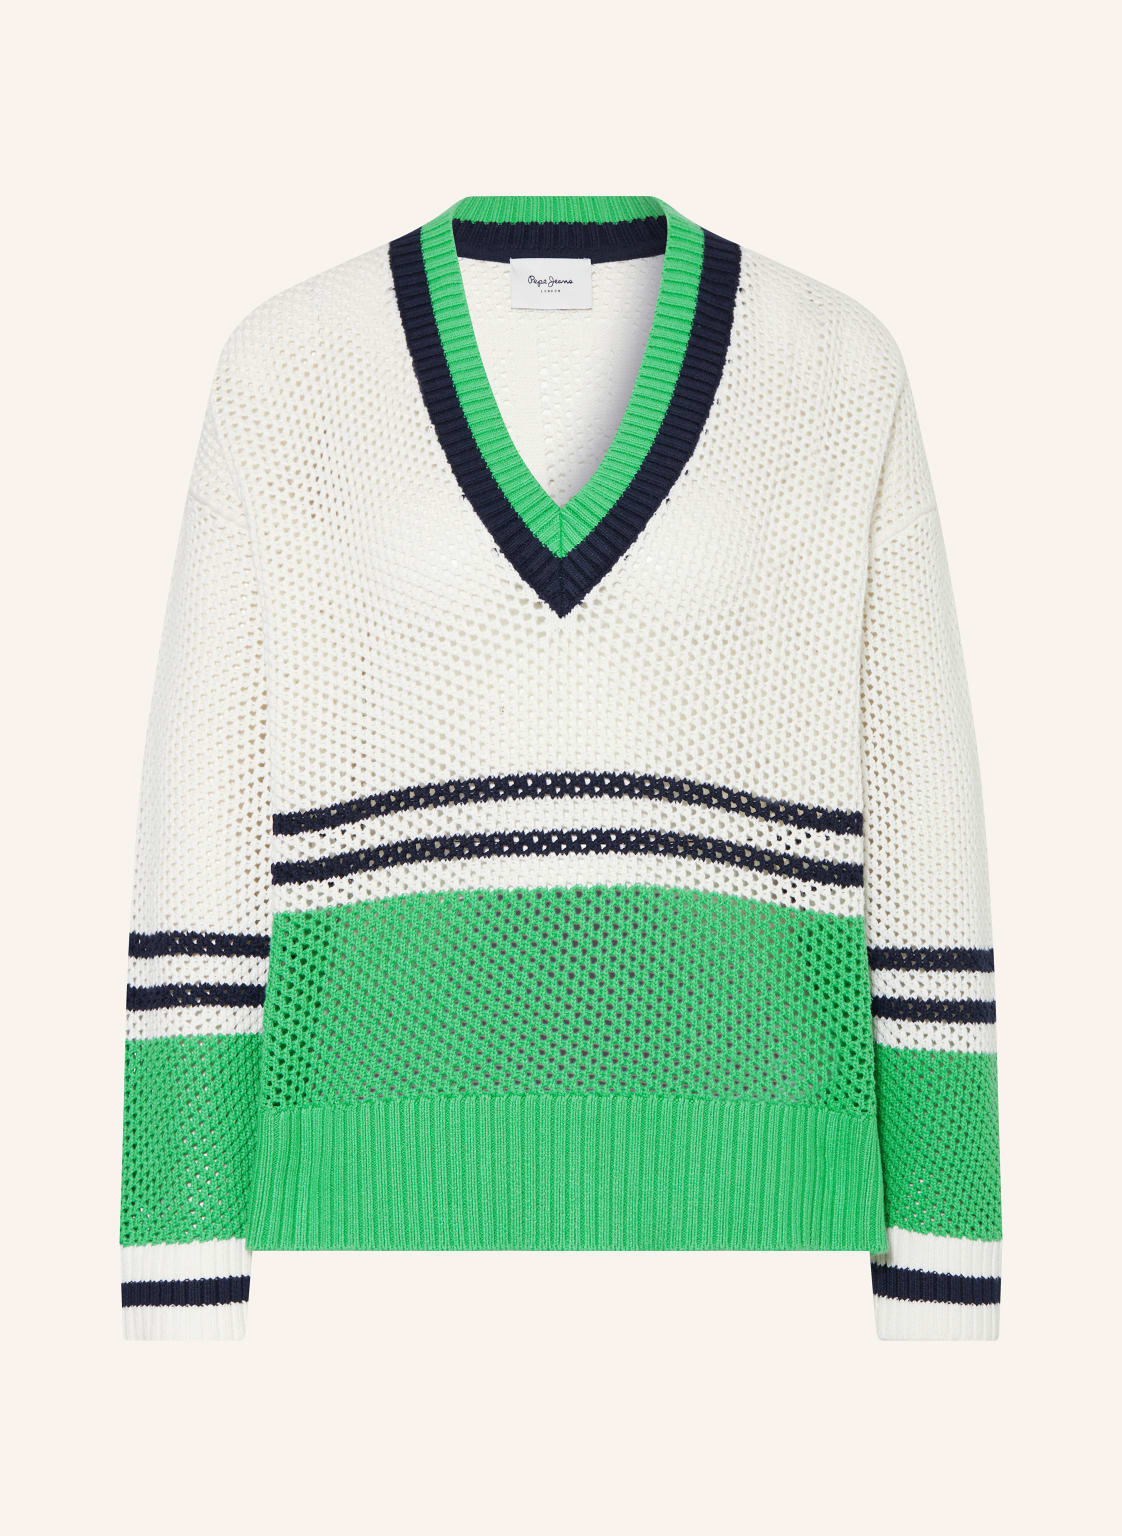 Pepe Jeans Pullover weiss von Pepe Jeans